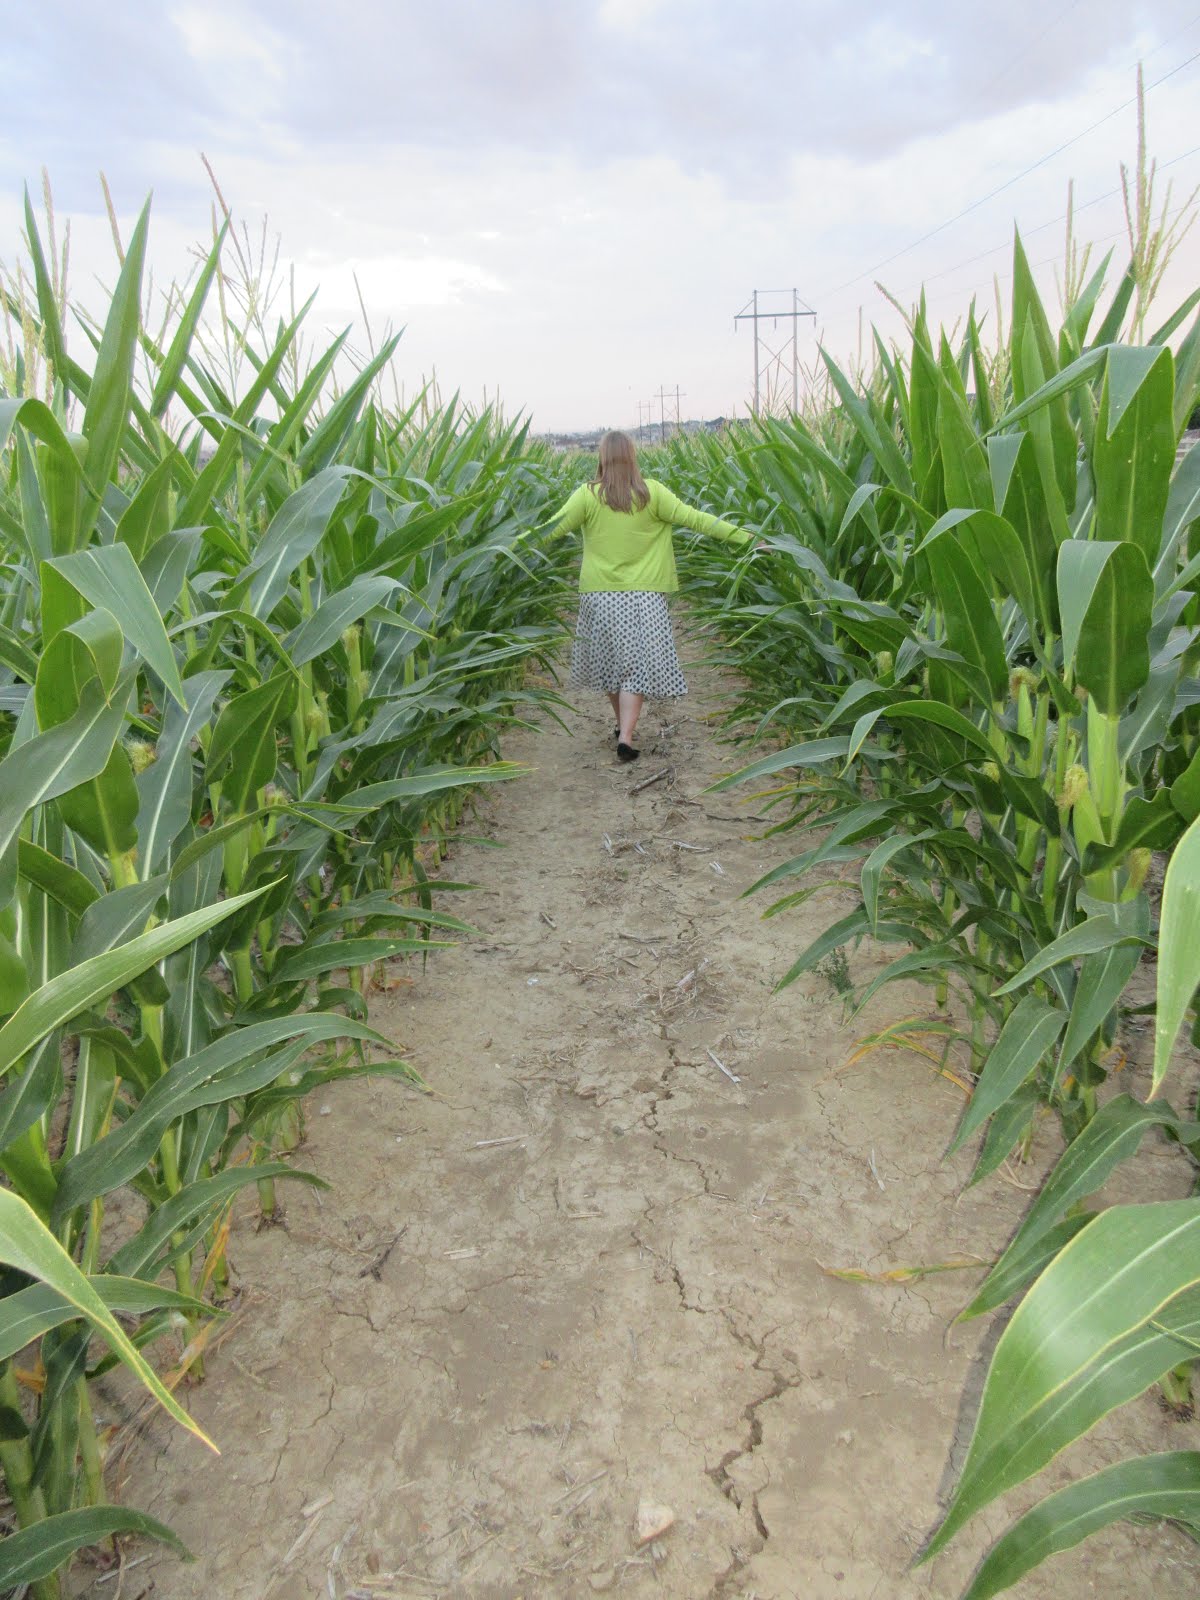 Sister Richards playing Smallville in a Cornfield